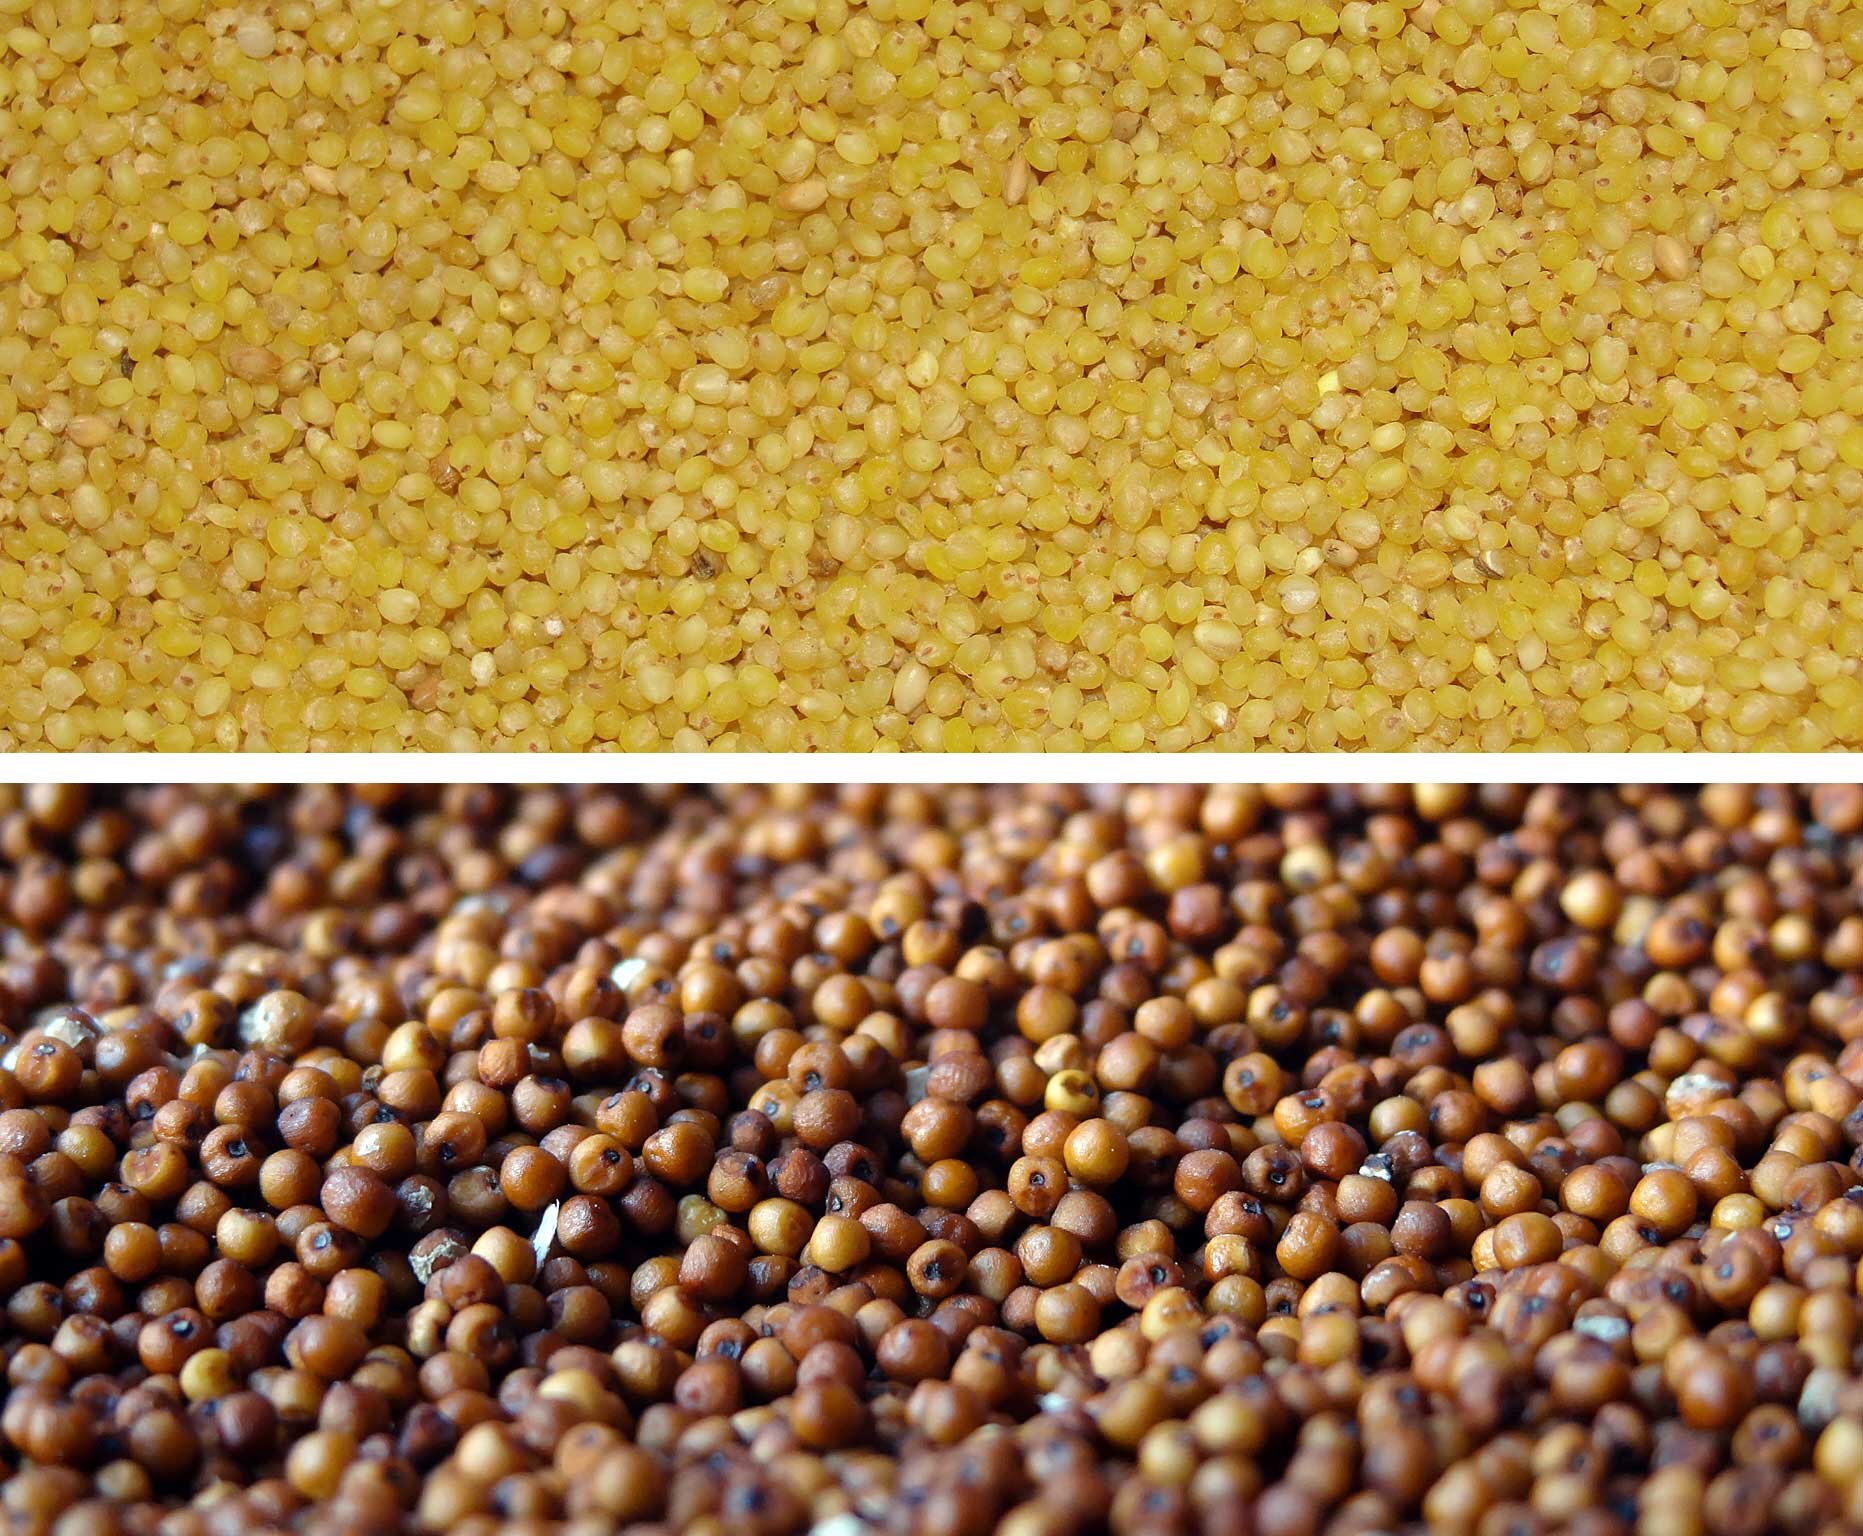 2-panel image showing photographs of millet grains. Panel 1: Grains of foxtail millet. The grains are small, round, and yellow in color. Panel 2: Grains of finger millet. The grain are small and round and range from light orange to medium brown in color.